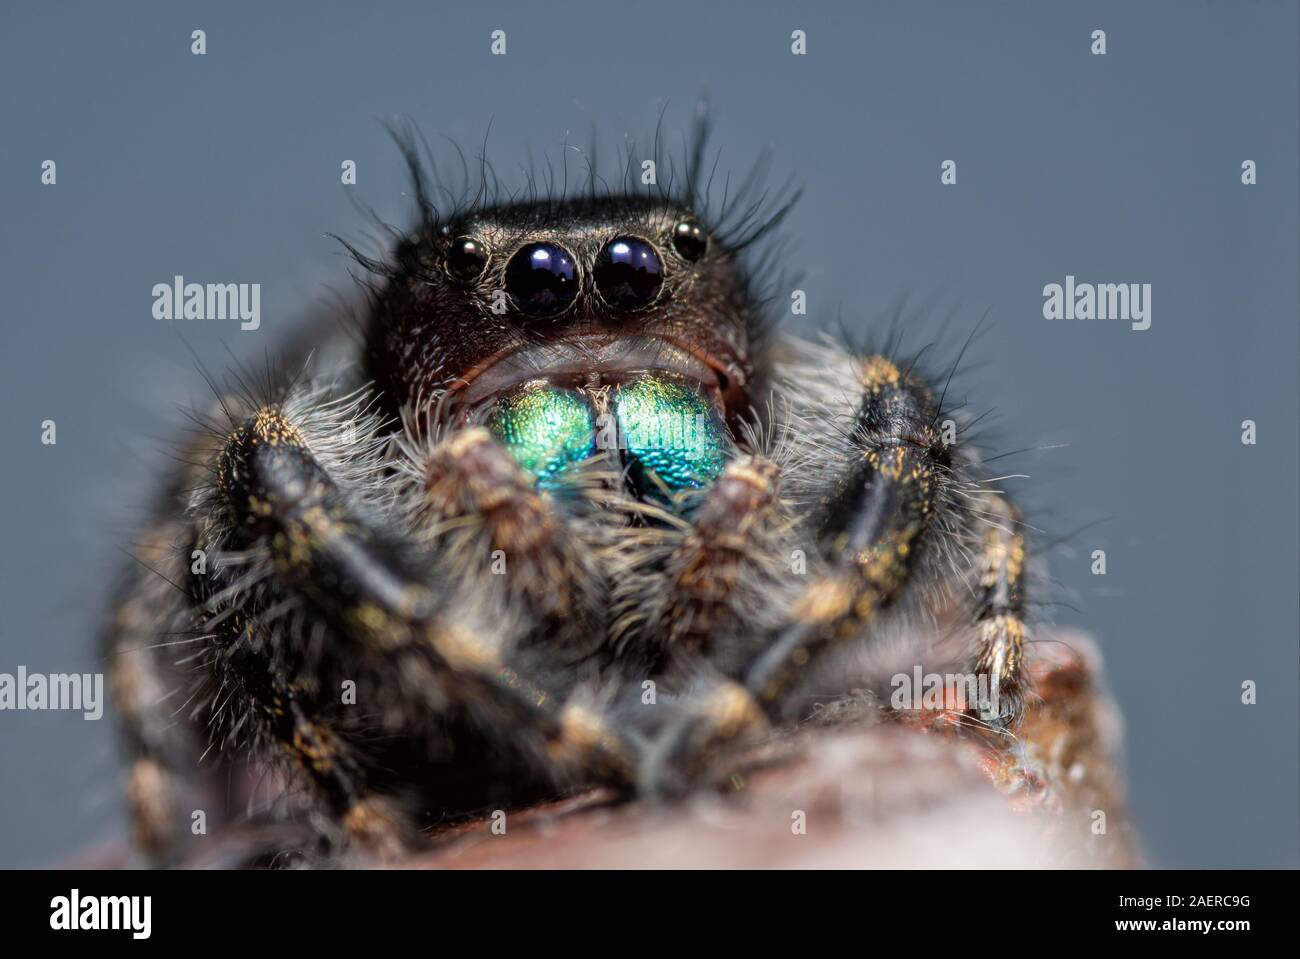 Immature Phidippus audax, Bold jumping spider, with his iridescent blue-green chelicerae, resting on top of a fence post with blue sky background Stock Photo